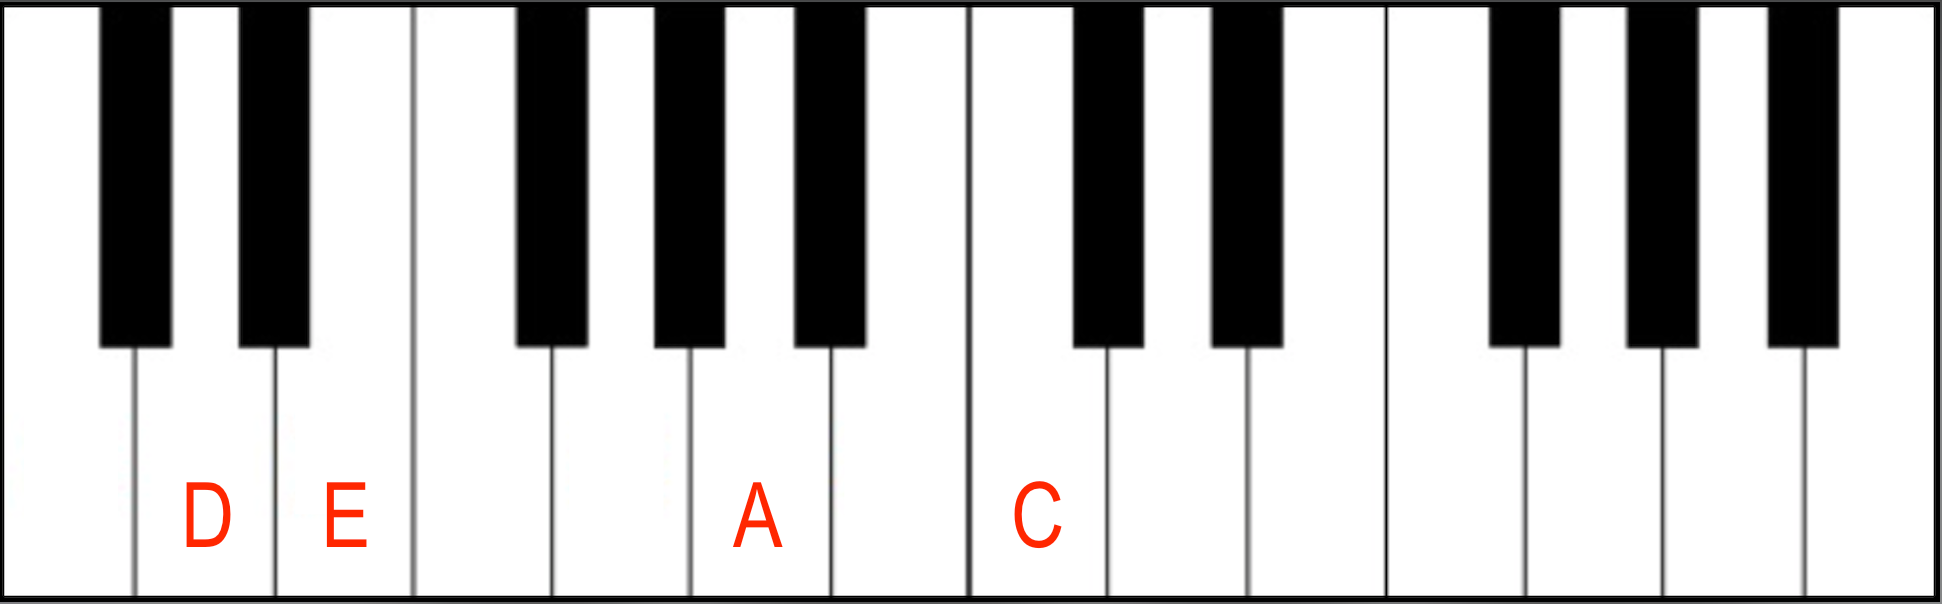 C(6/9) Chord over D